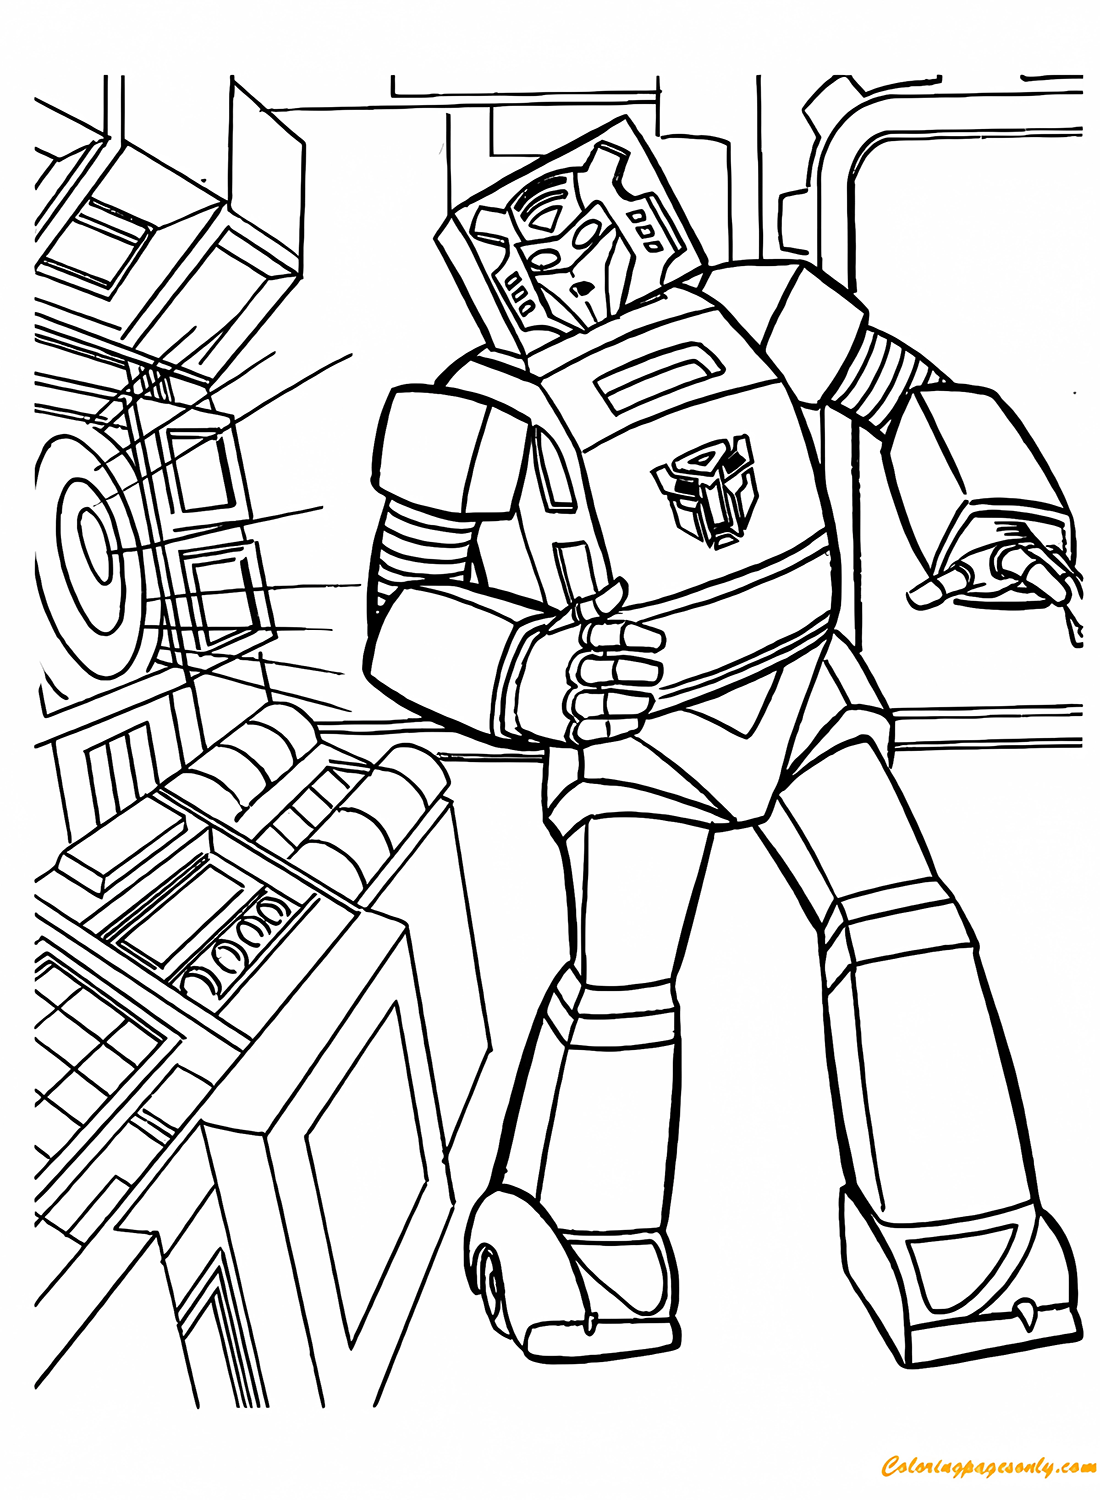 Transformers Bumblebee Listening To Music Coloring Pages